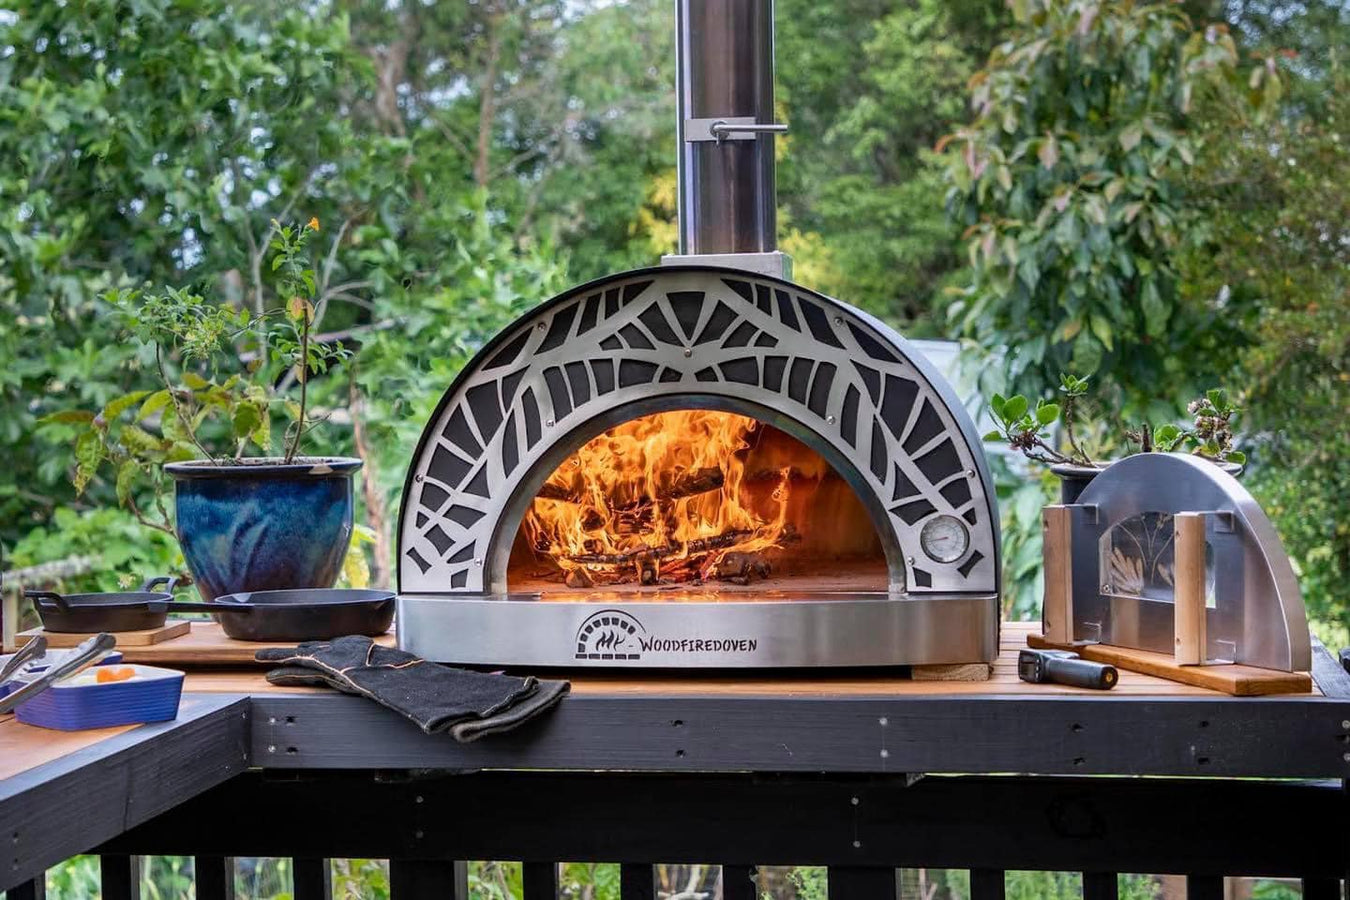 Pizza Oven on a bench with a roaring fire inside. 